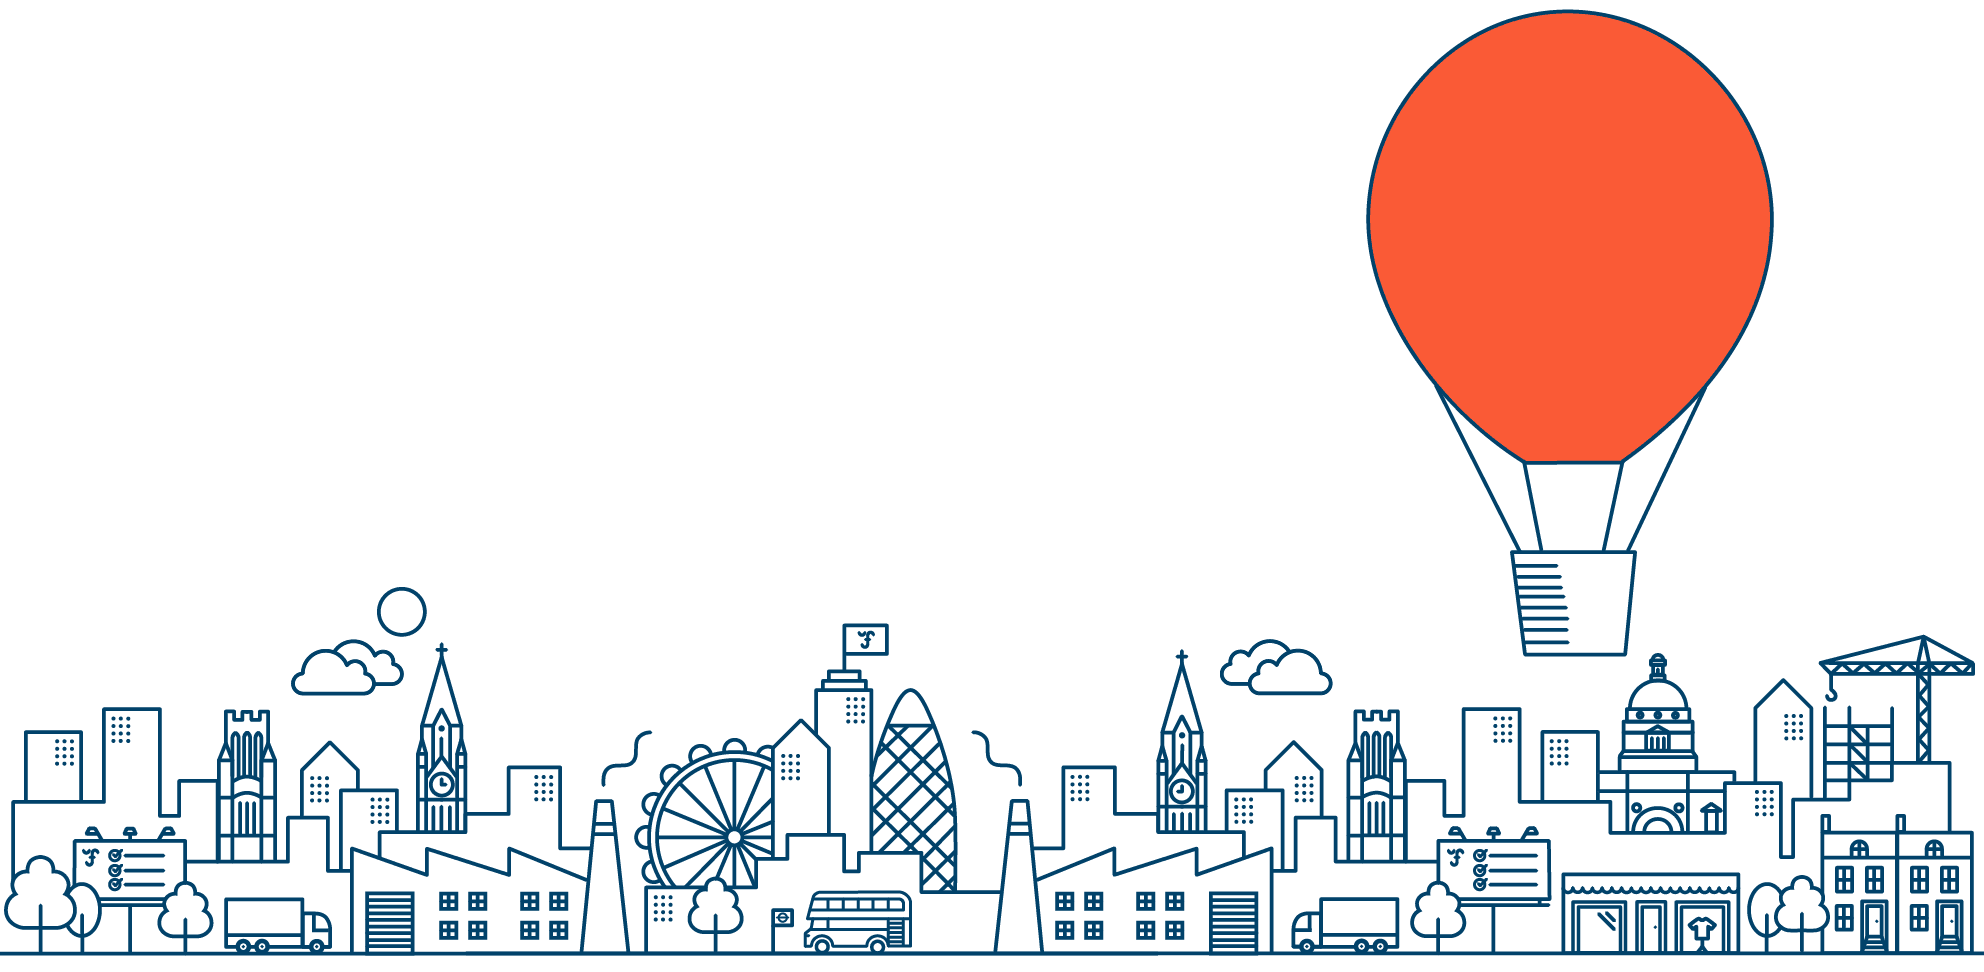 Ultimate Finance cityscape illustration with orange hot air balloon flying